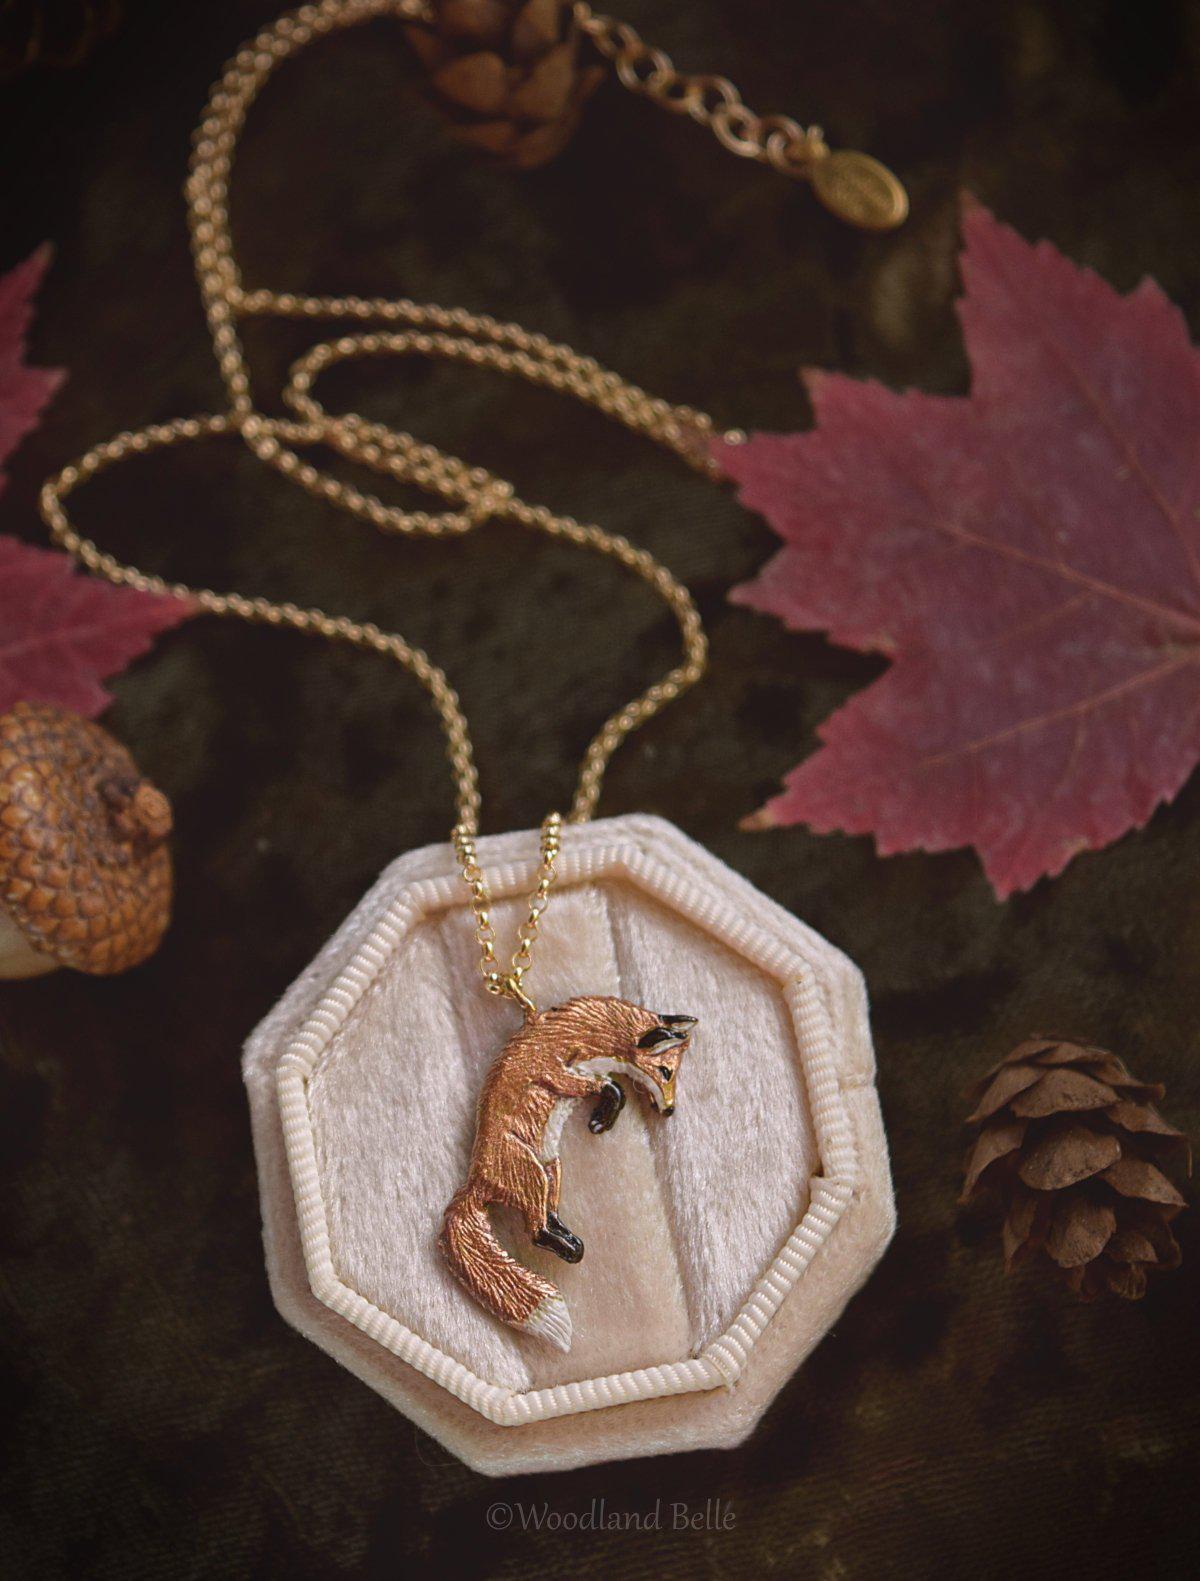 Leaping Red Fox Necklace - Enameled Bronze Jumping Fox Pendant - Small Animal Charm Jewelry- Fox Lover Gift, Cottagecore - by Woodland Belle